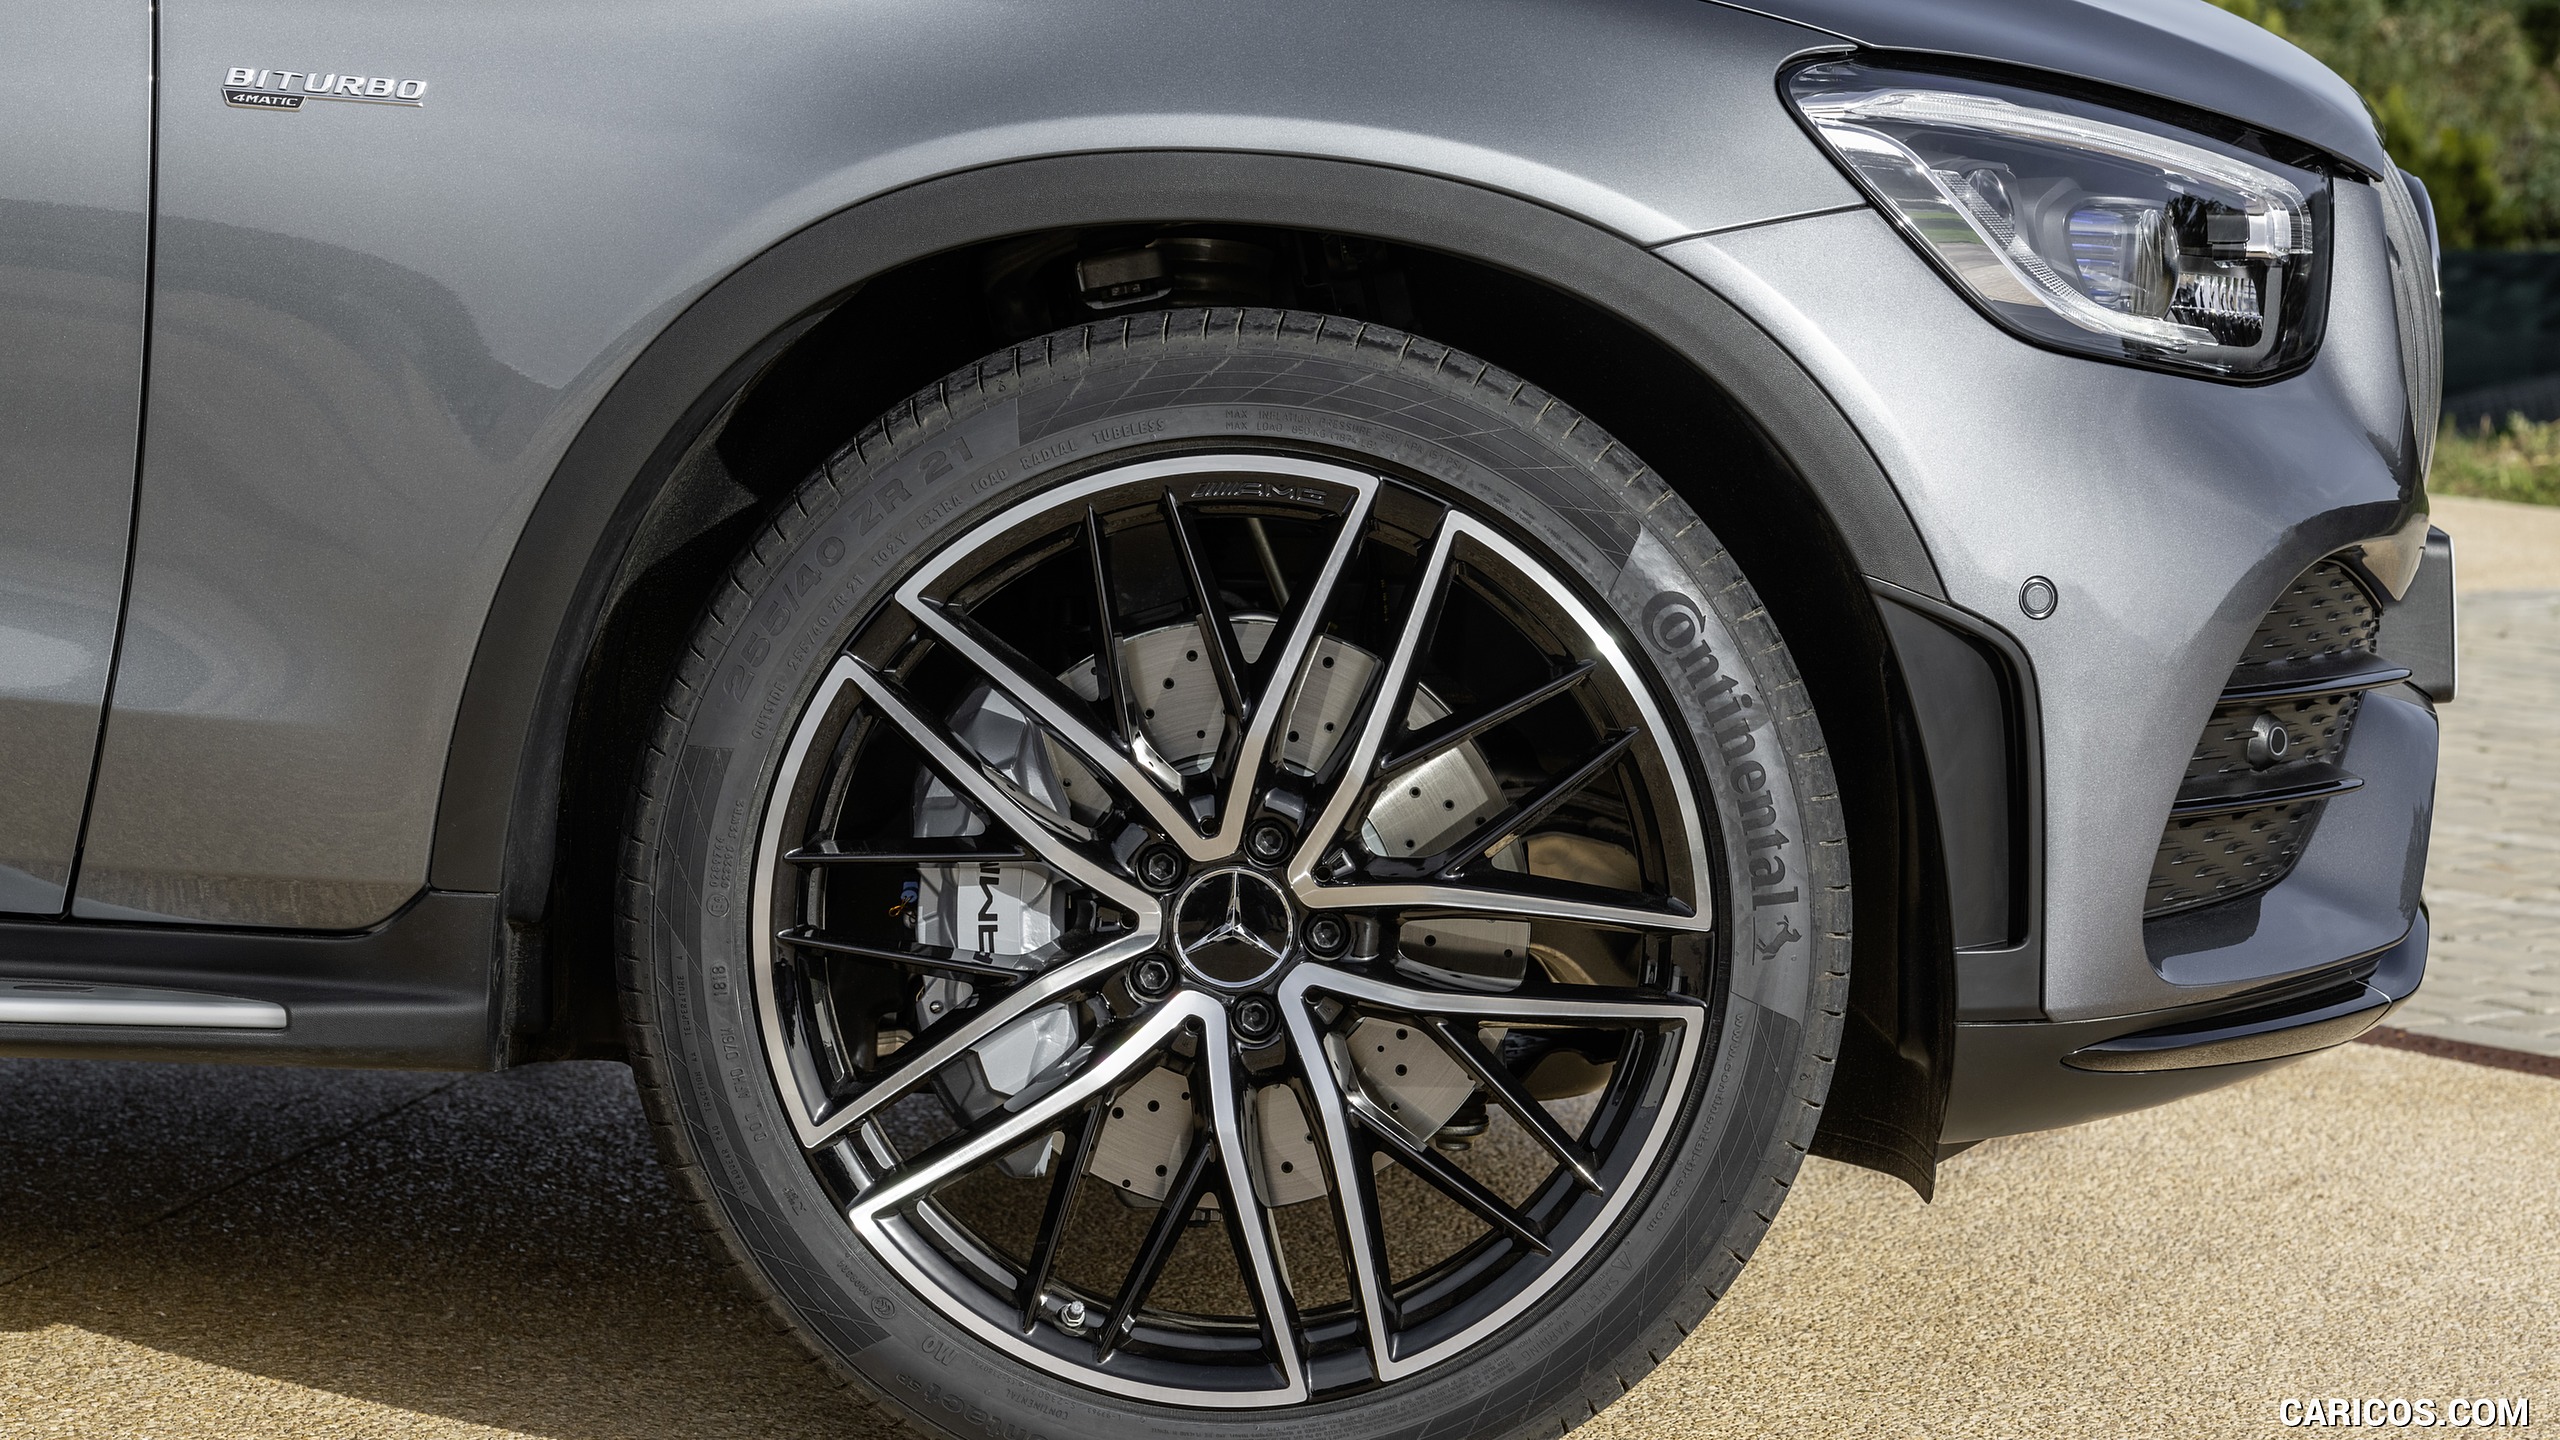 2020 Mercedes-AMG GLC 43 4MATIC Coupe - Wheel, #21 of 173